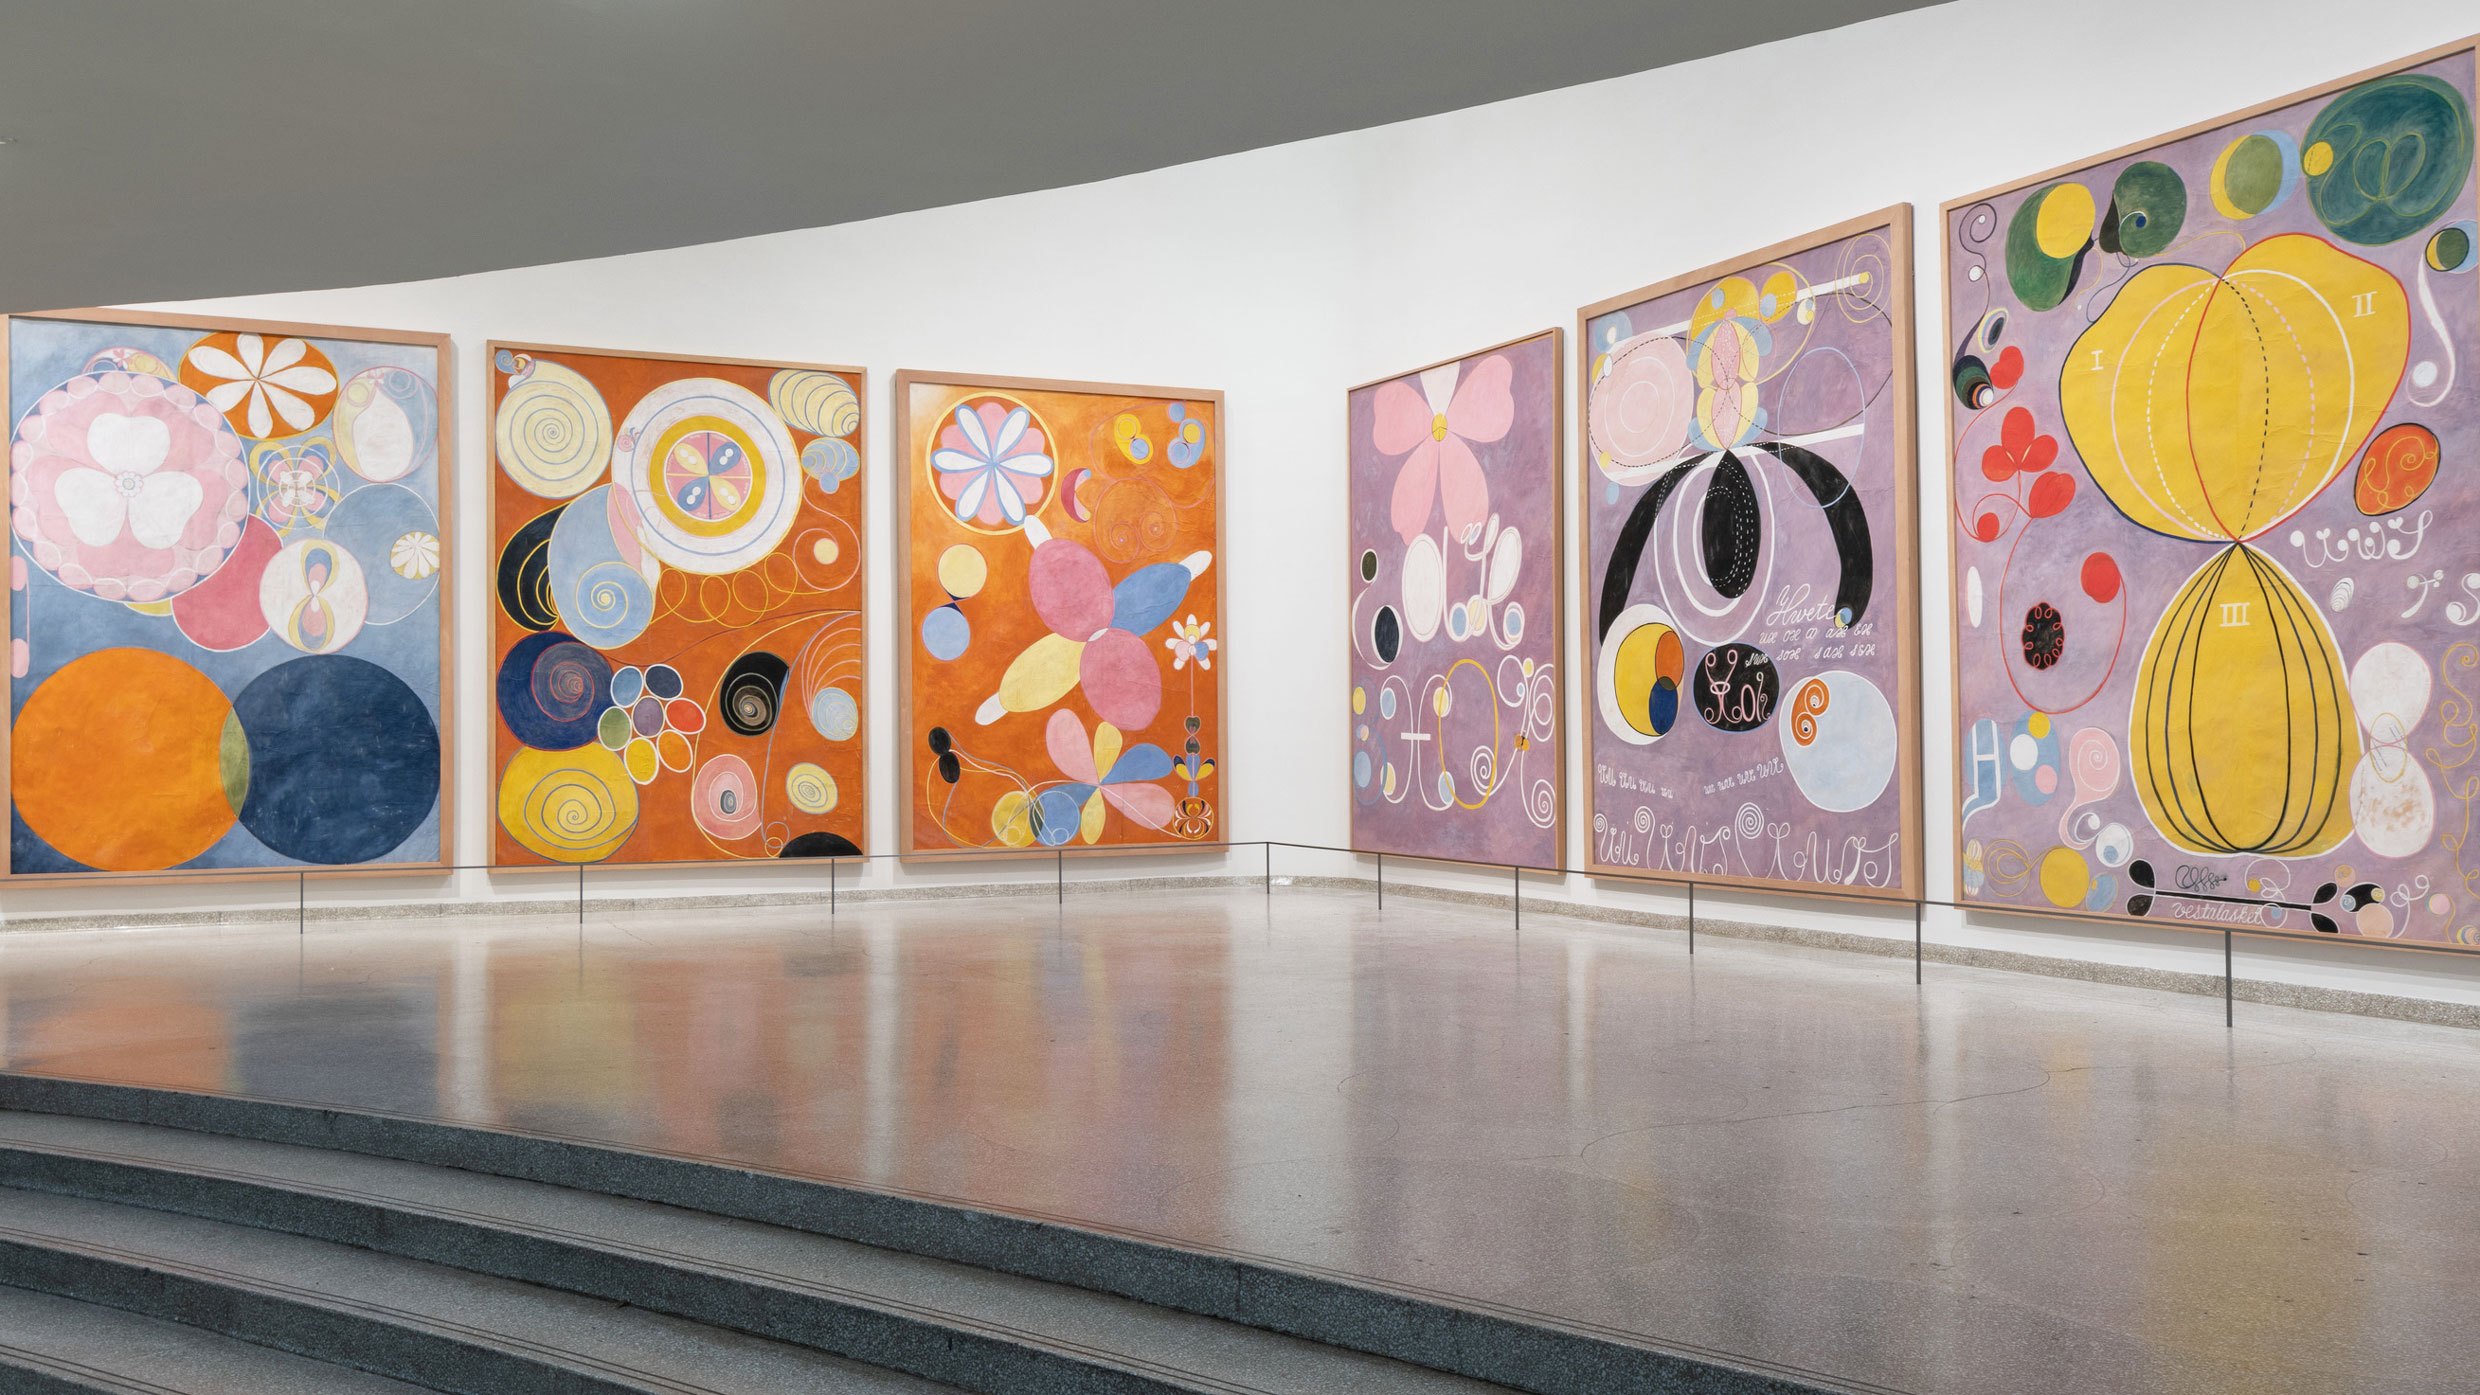 Hilma af Klint The Guggenheim Exhibition You Won’t Want to Miss